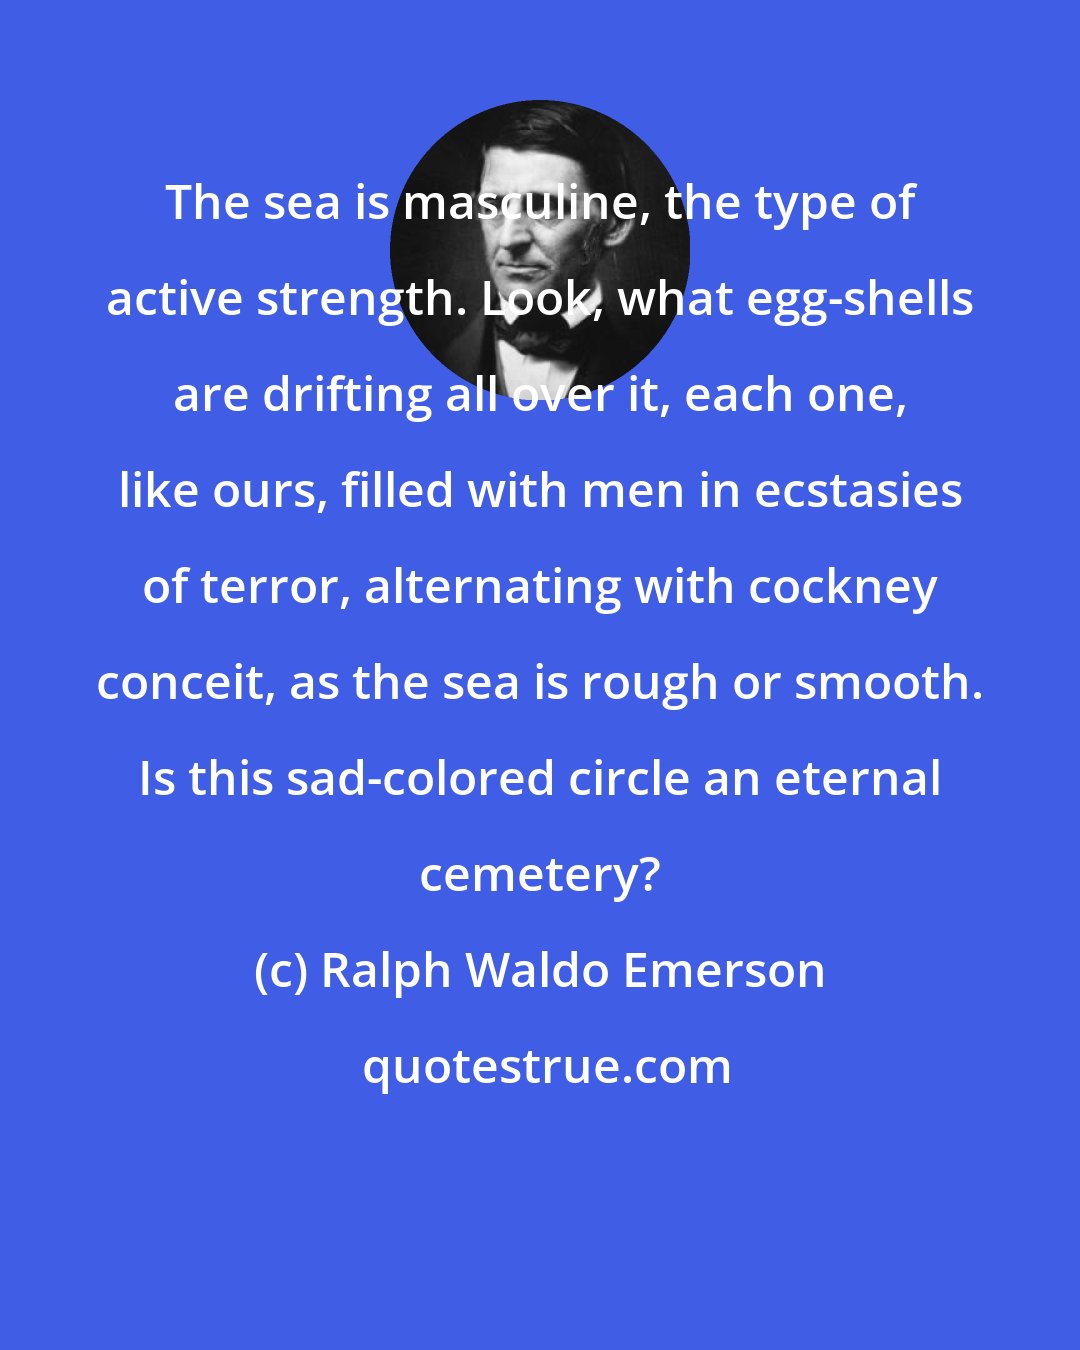 Ralph Waldo Emerson: The sea is masculine, the type of active strength. Look, what egg-shells are drifting all over it, each one, like ours, filled with men in ecstasies of terror, alternating with cockney conceit, as the sea is rough or smooth. Is this sad-colored circle an eternal cemetery?